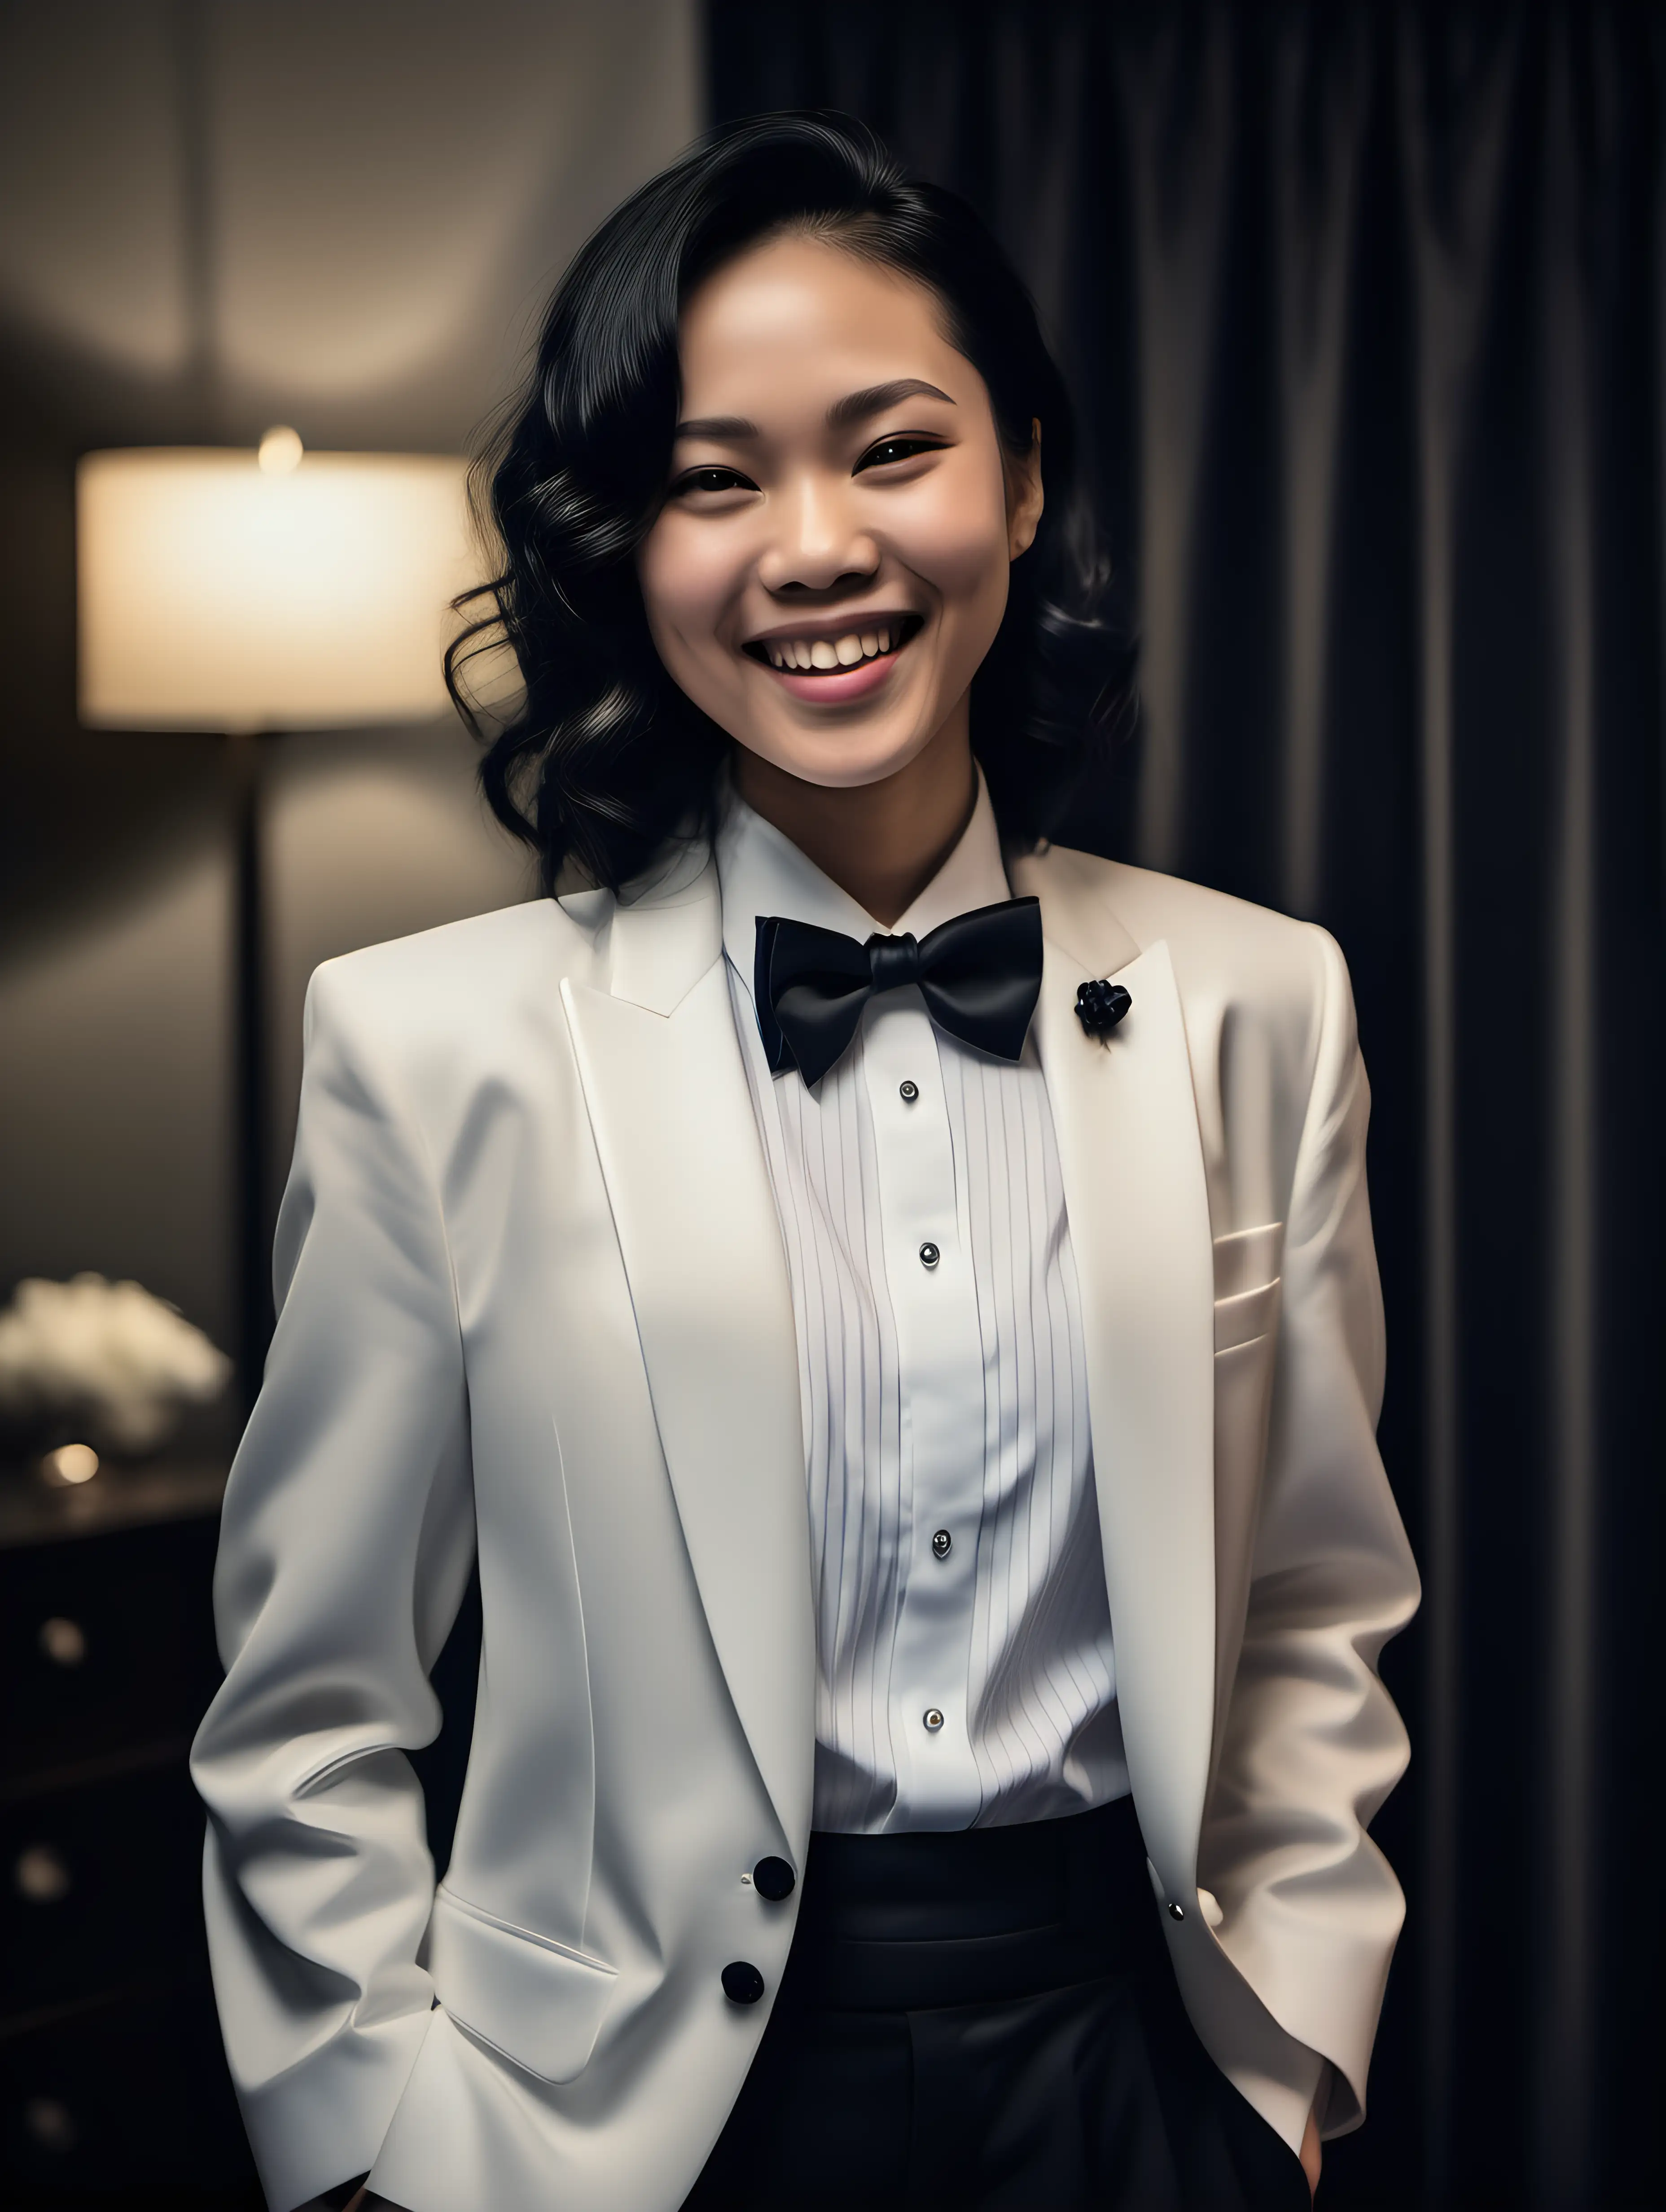 Smiling and laughing light skin Chinese woman with shoulder length black hair wearing a tuxedo with a black bow tie is standing in a room at night.  Her shirt has double french cuffs.  She has cufflinks.